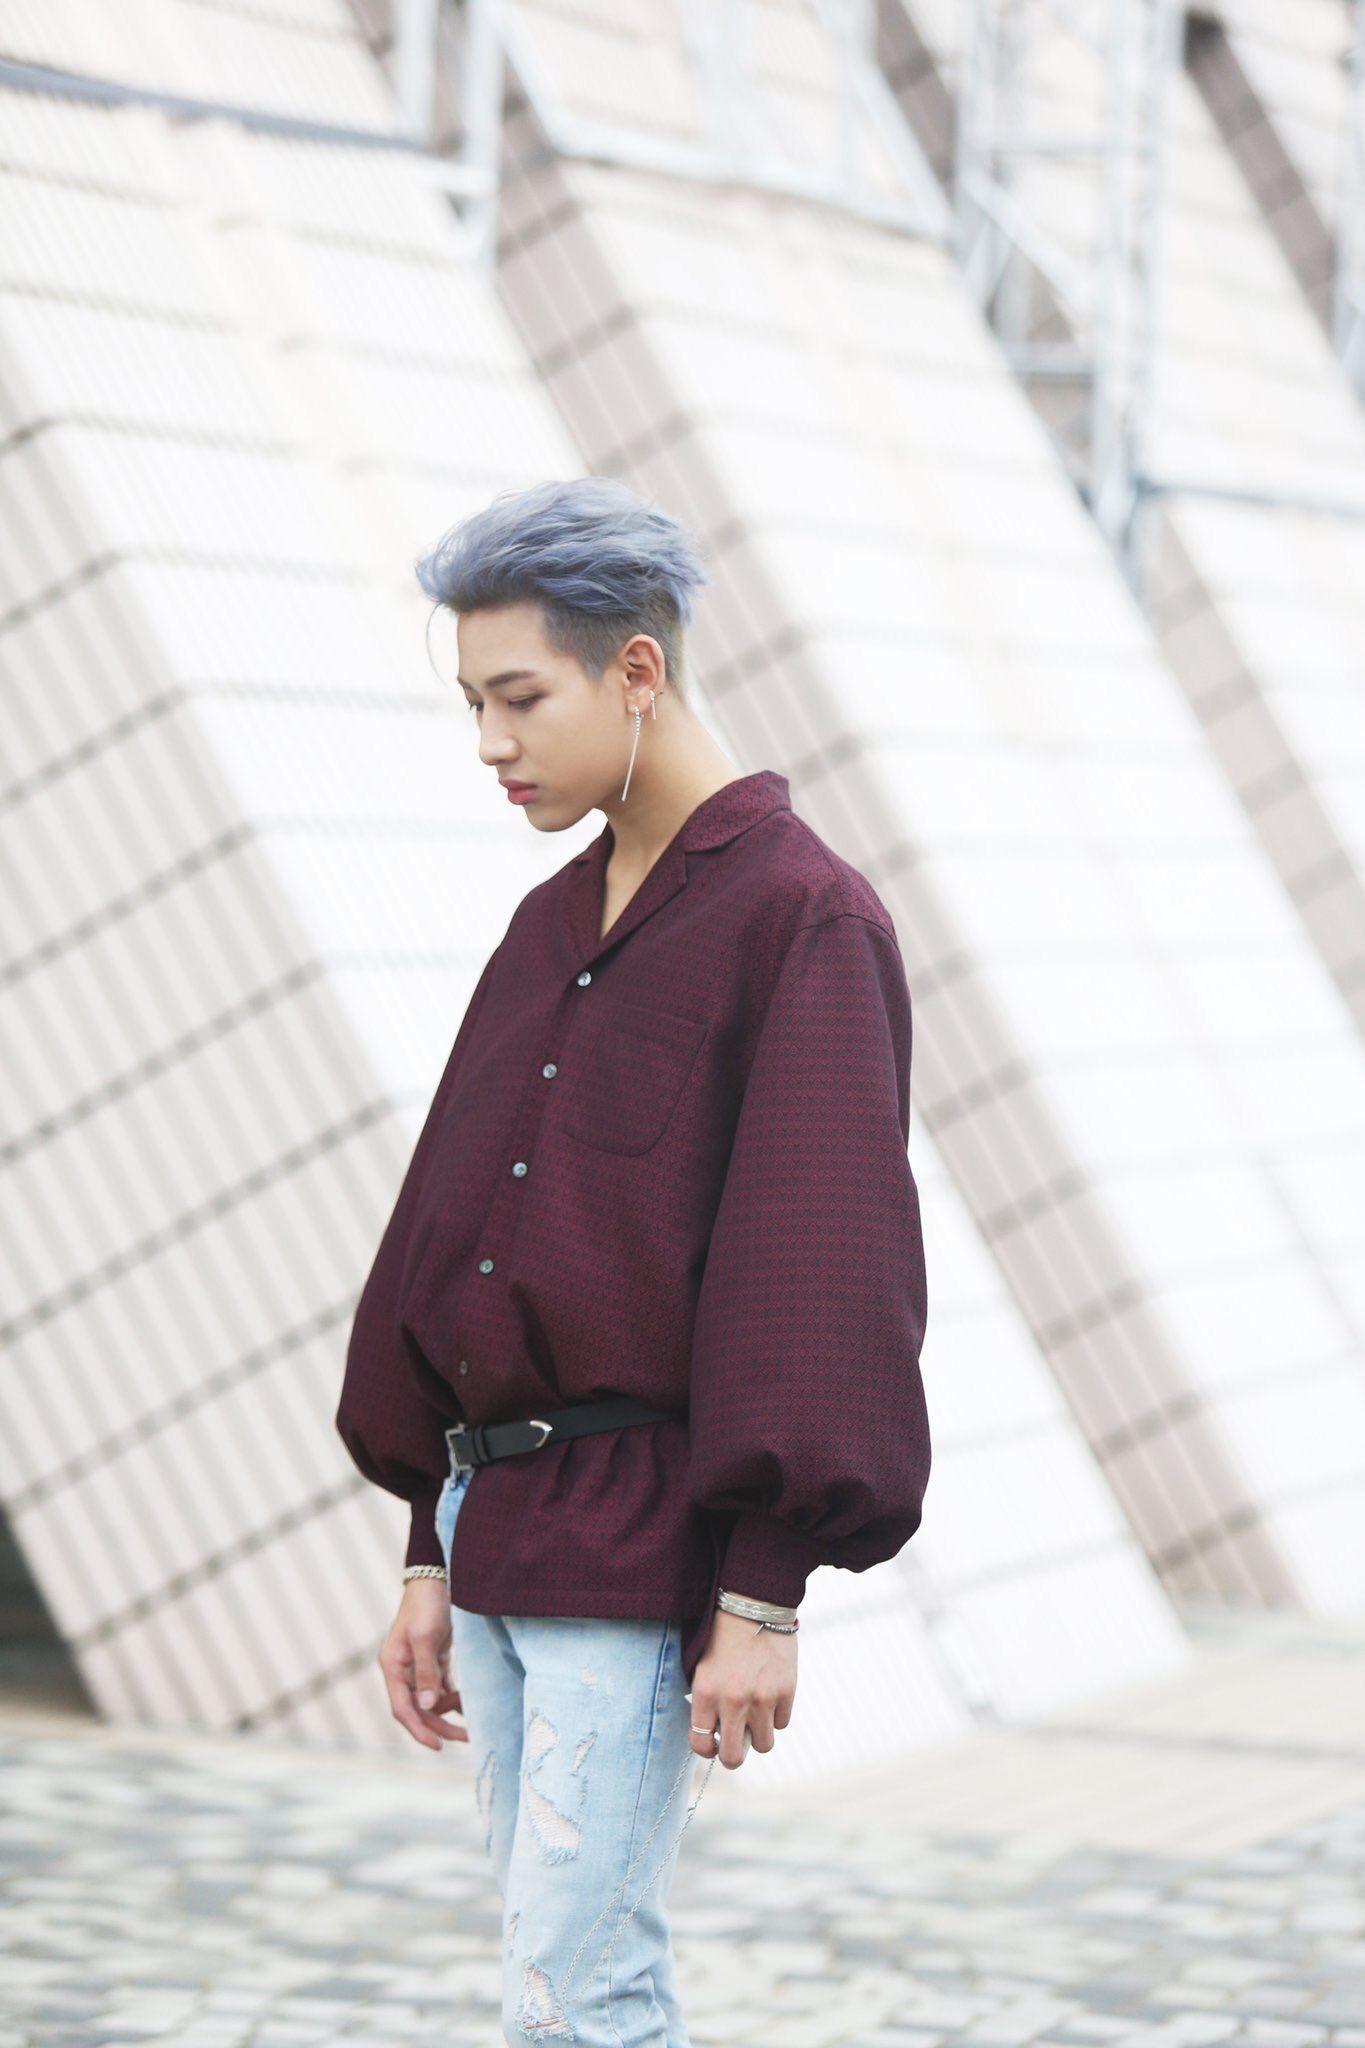 BamBam looks good with his new hair color. BamBam